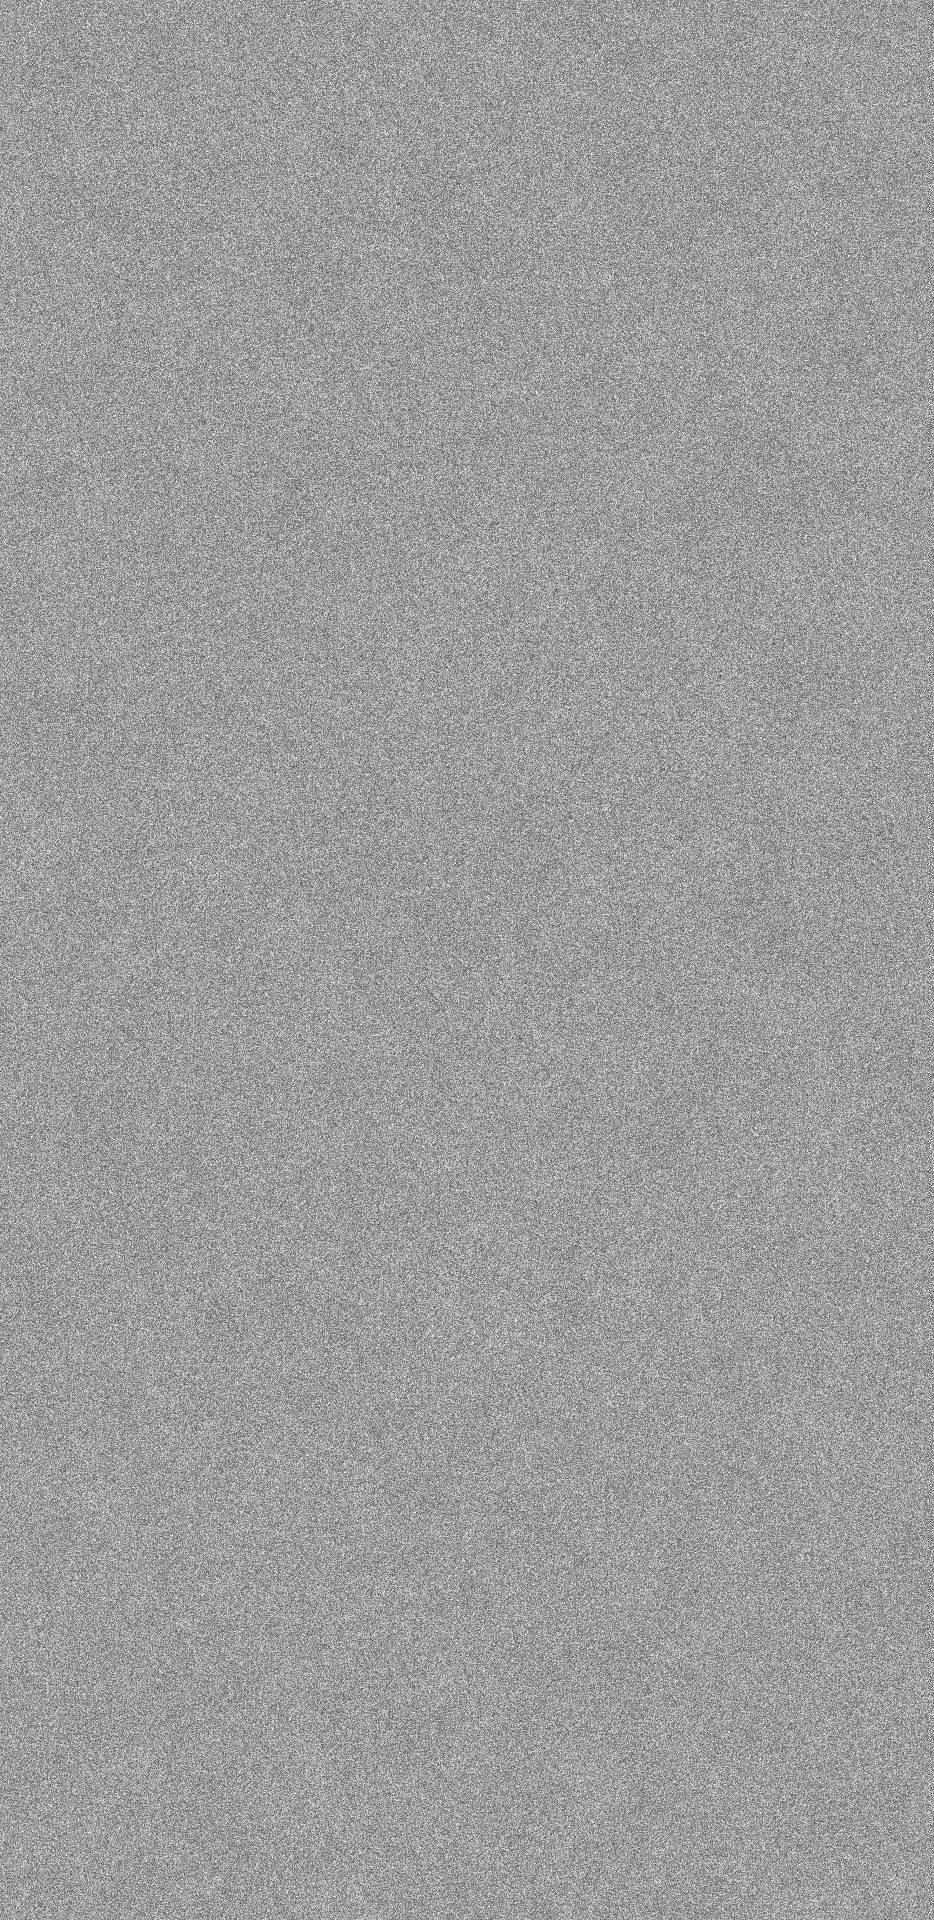 white noise background wallpaper for iphone